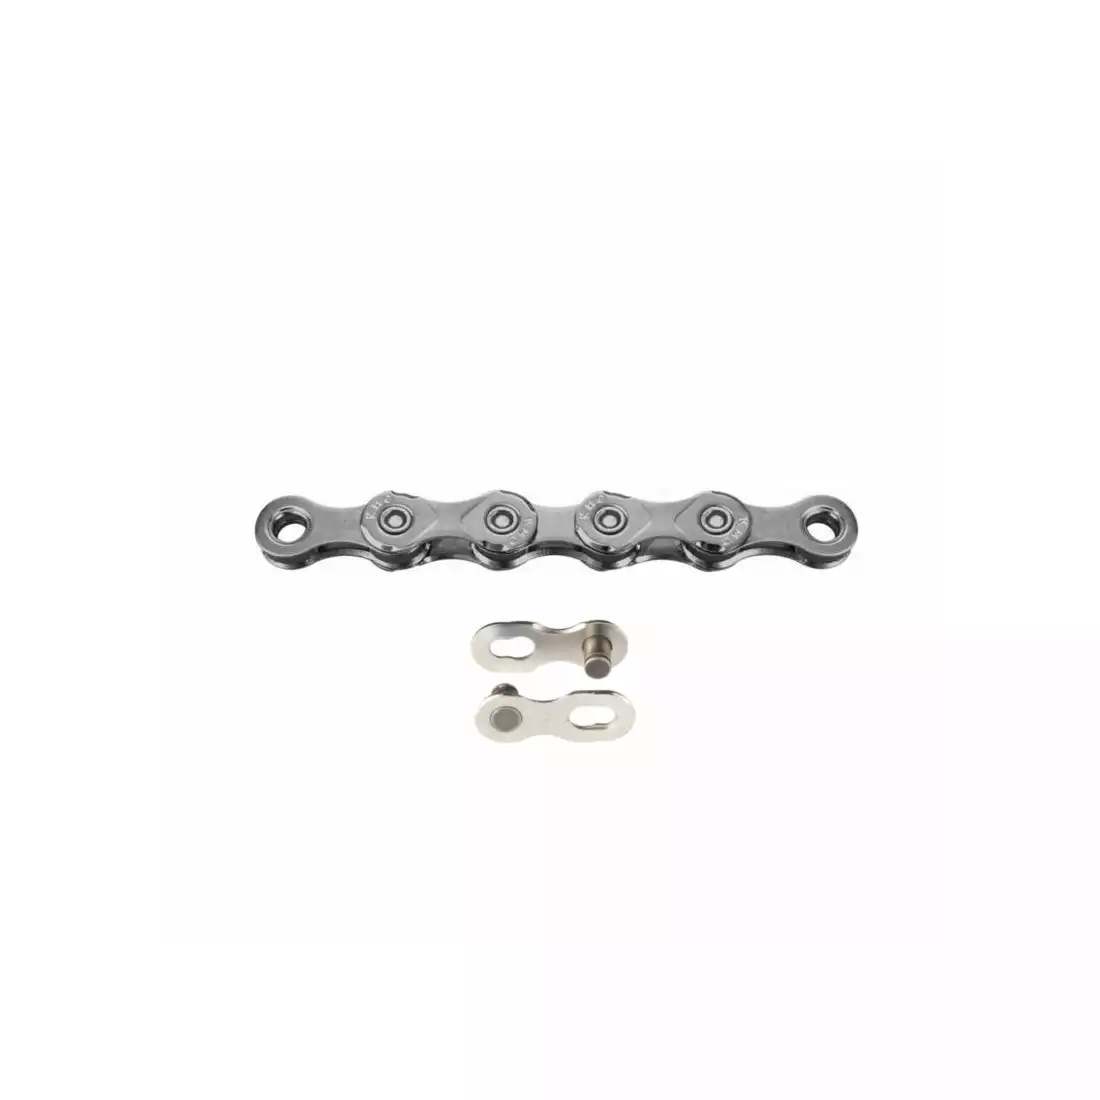 KMC X11 EPT Bicycle chain 11-speed, 118 links, silver